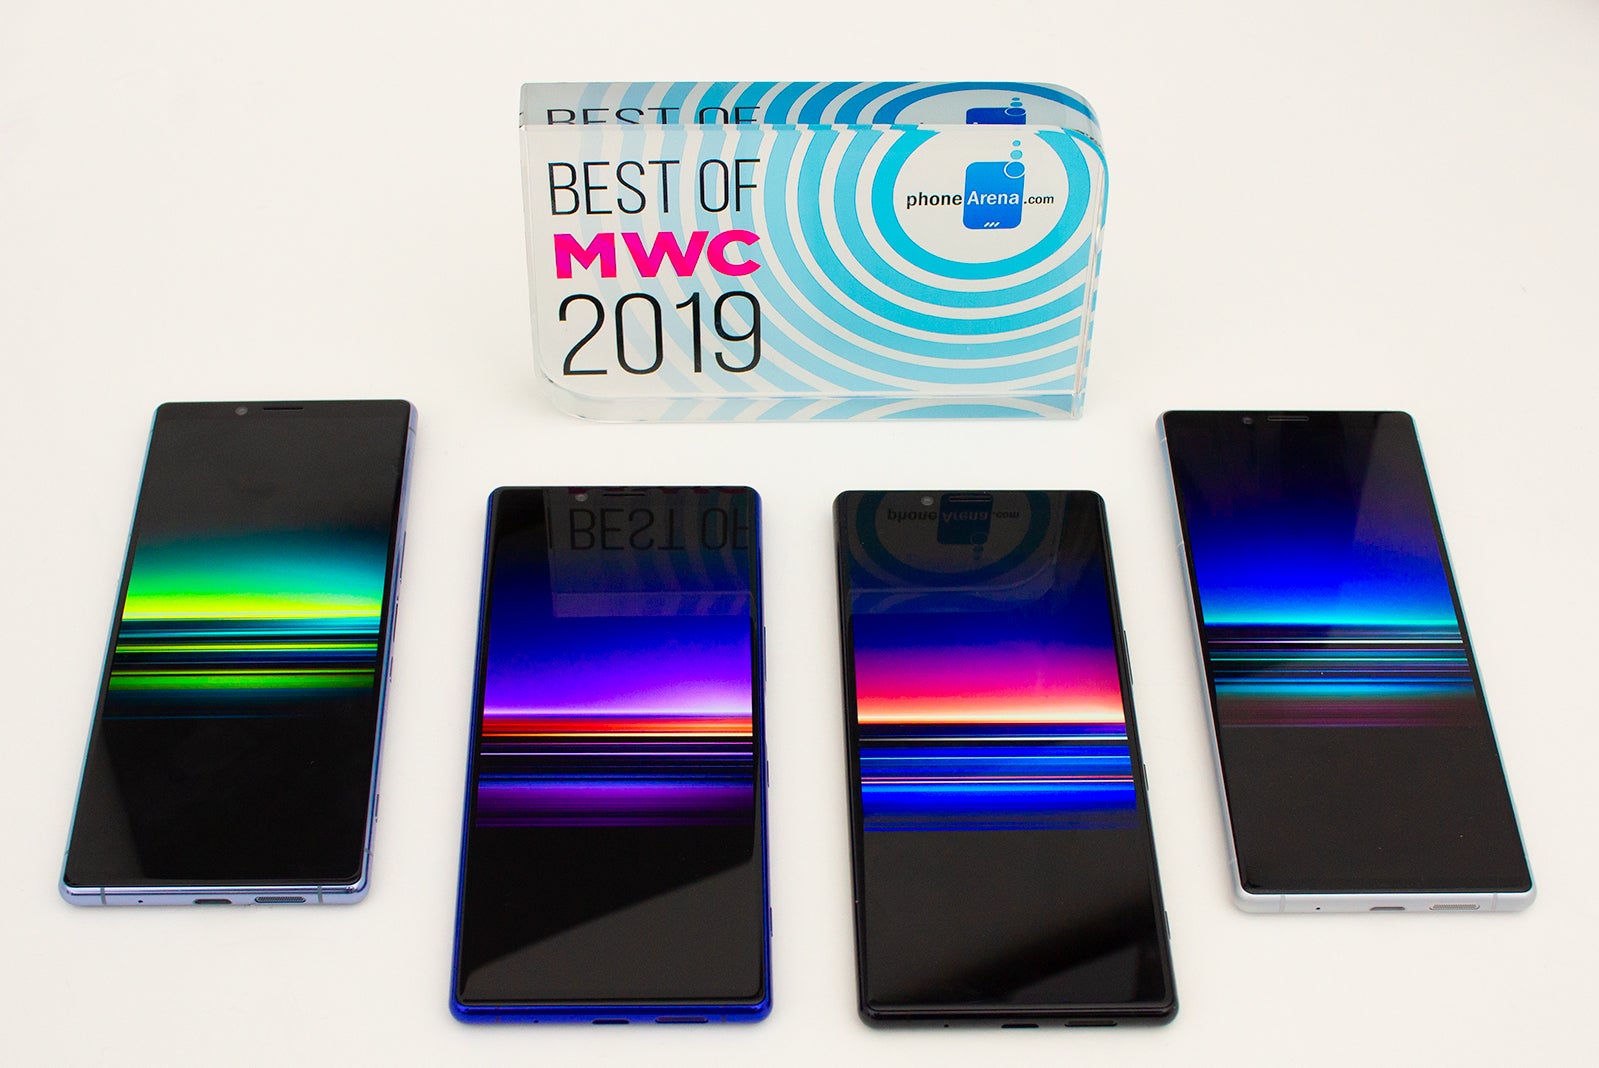 Best of MWC'19: It's awards time!